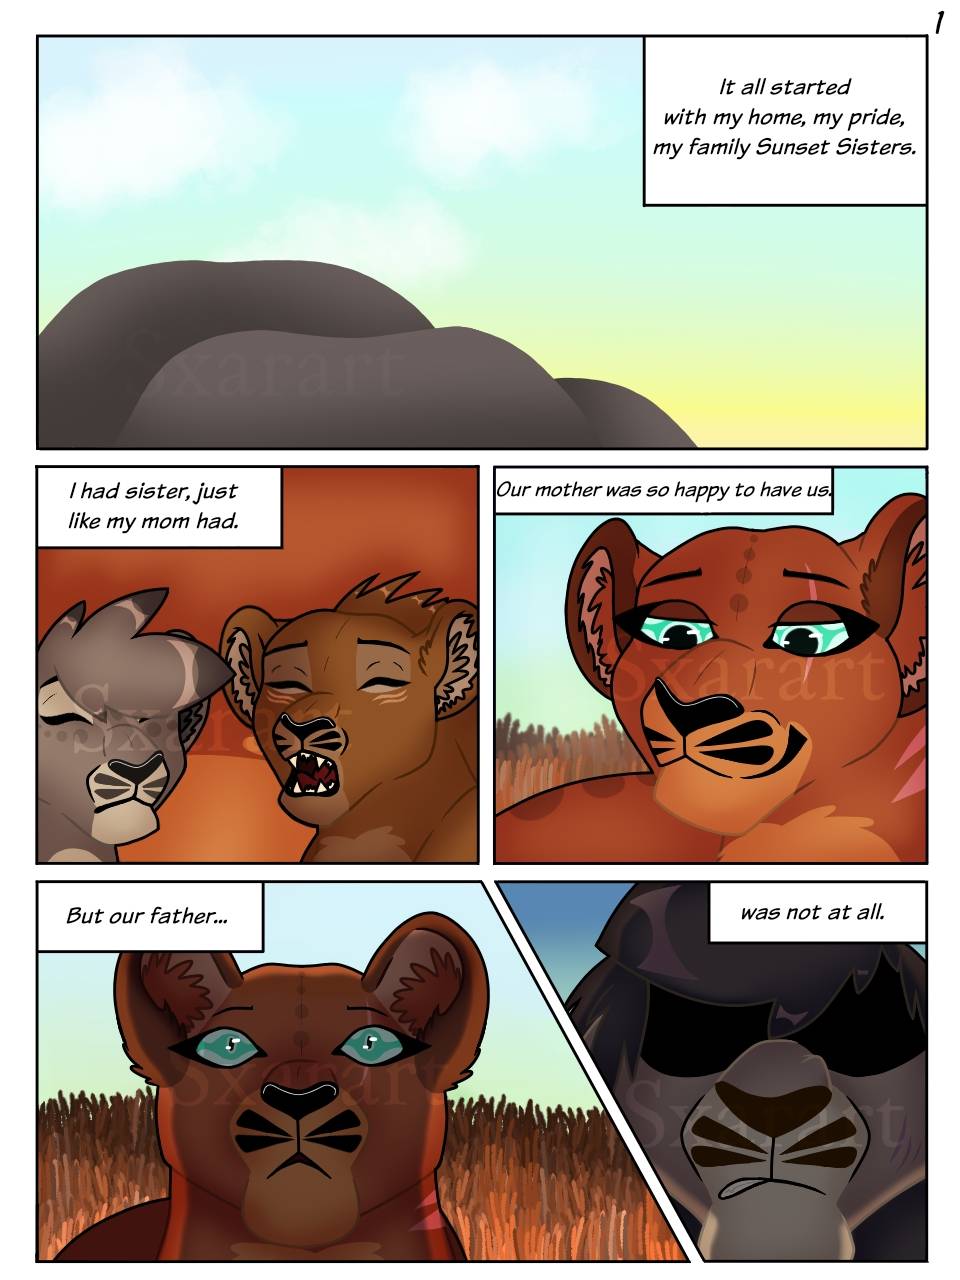 Sunset Sisters / page 1